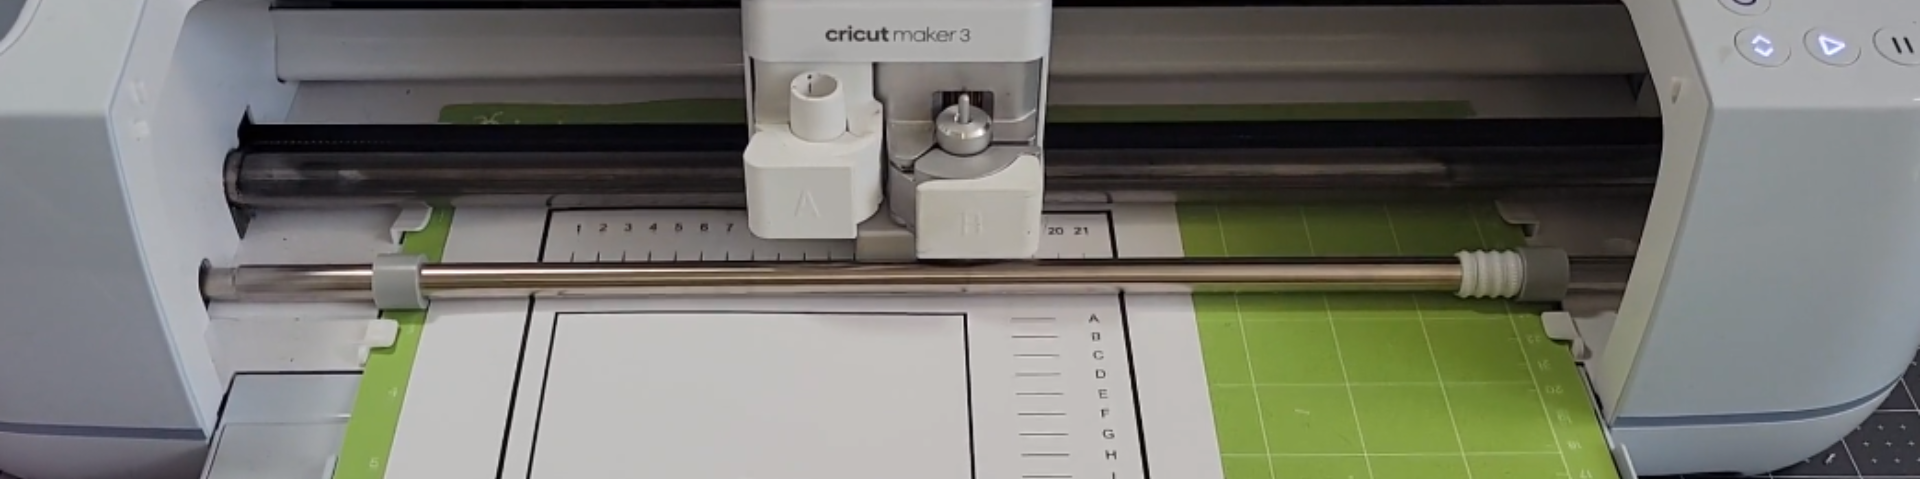 Get to know your Cricut Autopress – Help Center